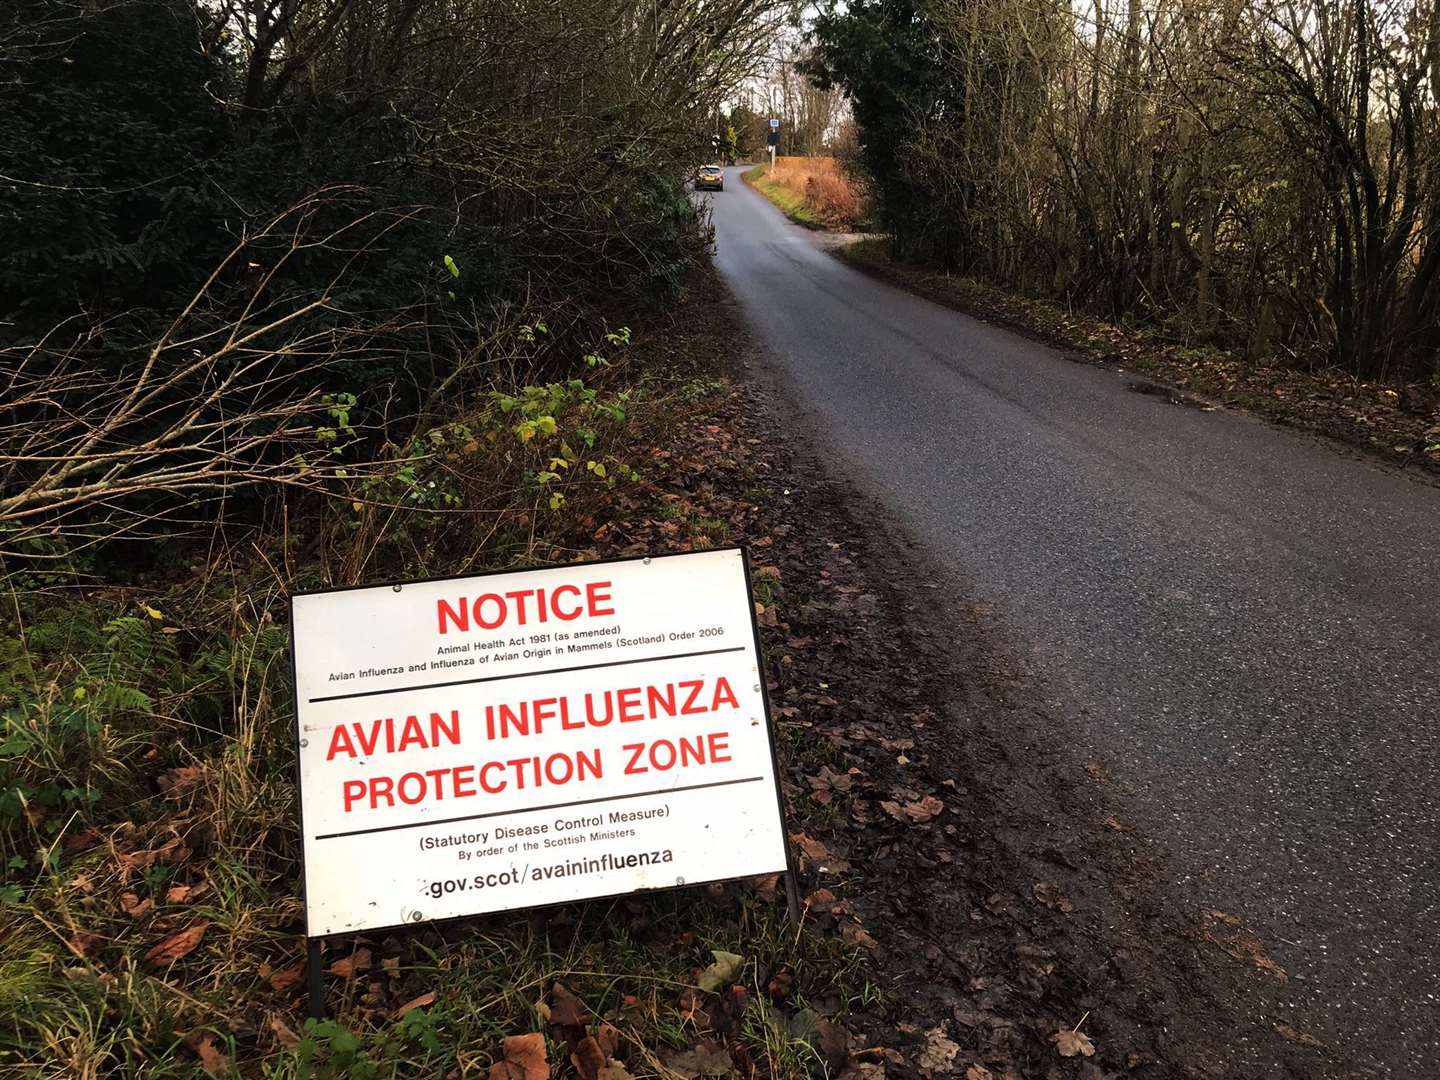 There have been a number of bird flu outbreaks in Aberdeenshire over the past months.